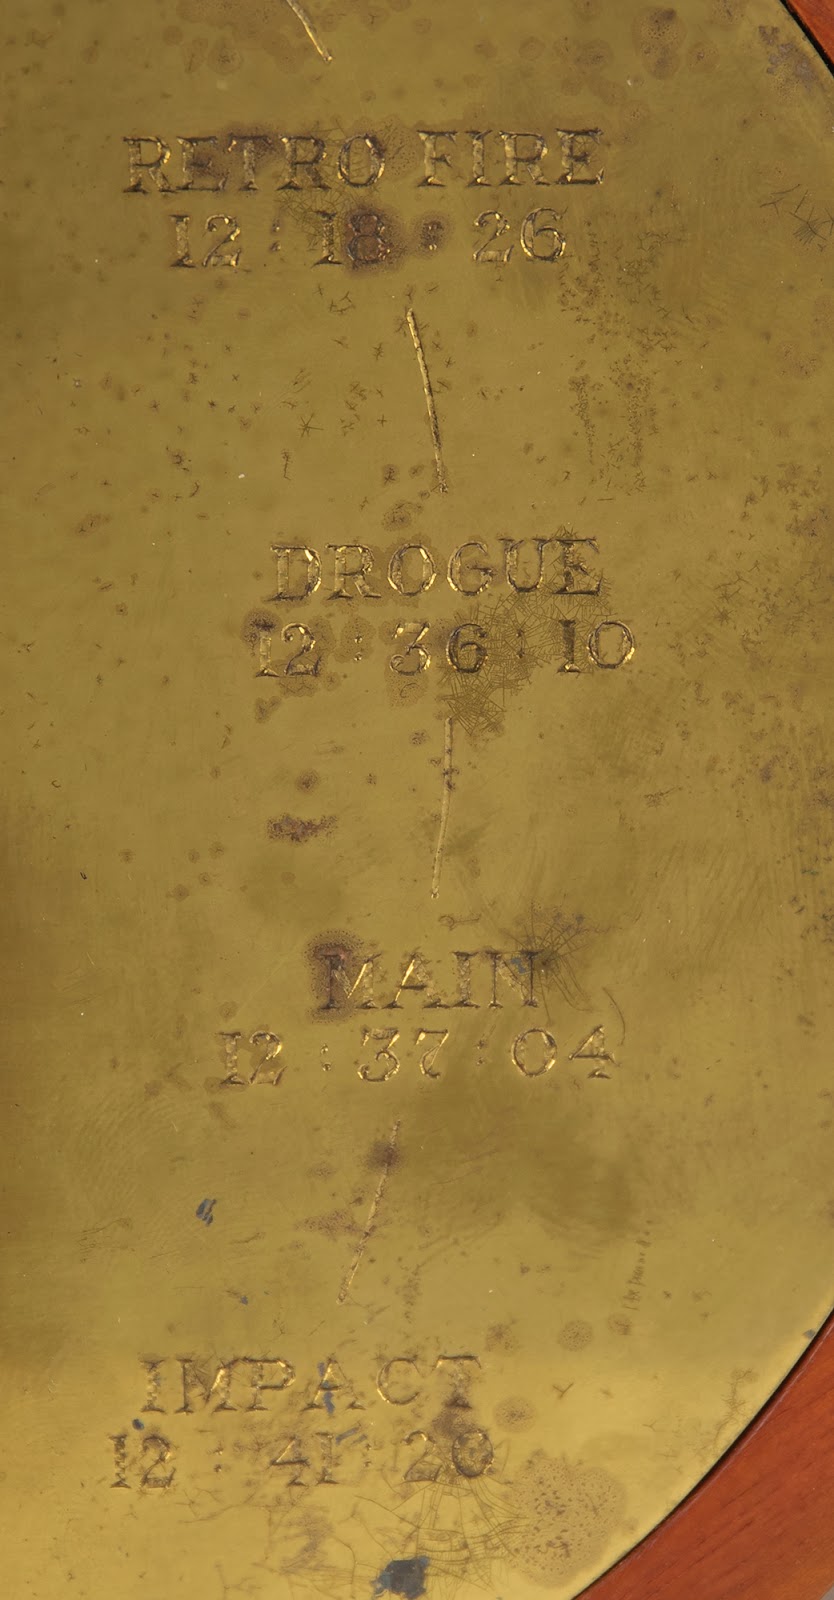 A close-up on the latter half of the flight timeline on the right of the clock’s gold face, chronicling the time of impact as, “12:41:20.”